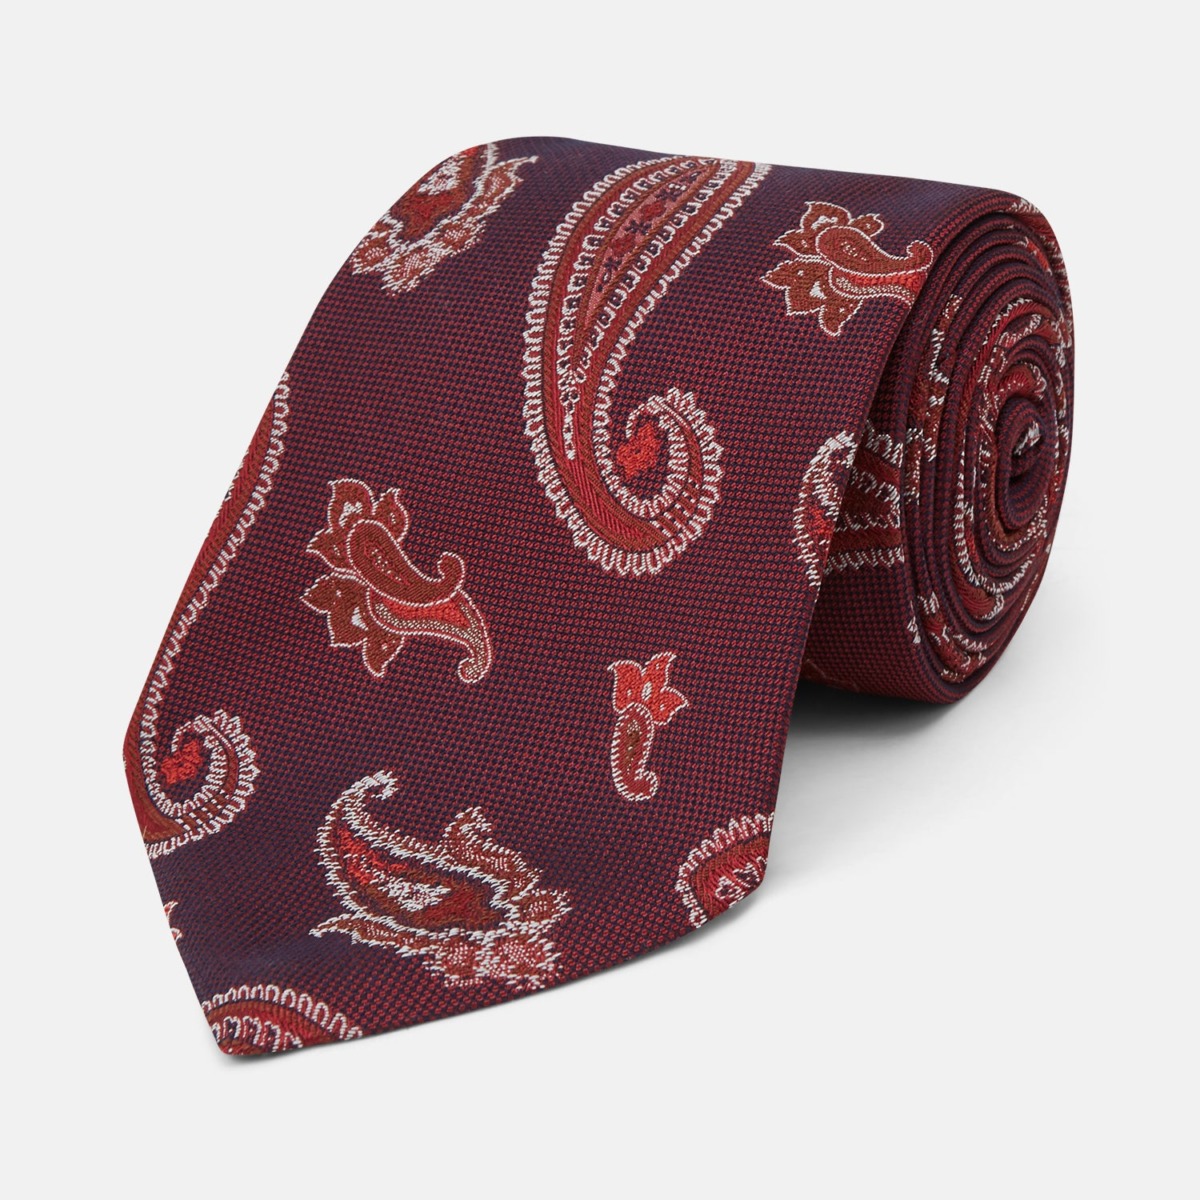 Turnbull And Asser Gent Tie in Burgundy GOOFASH